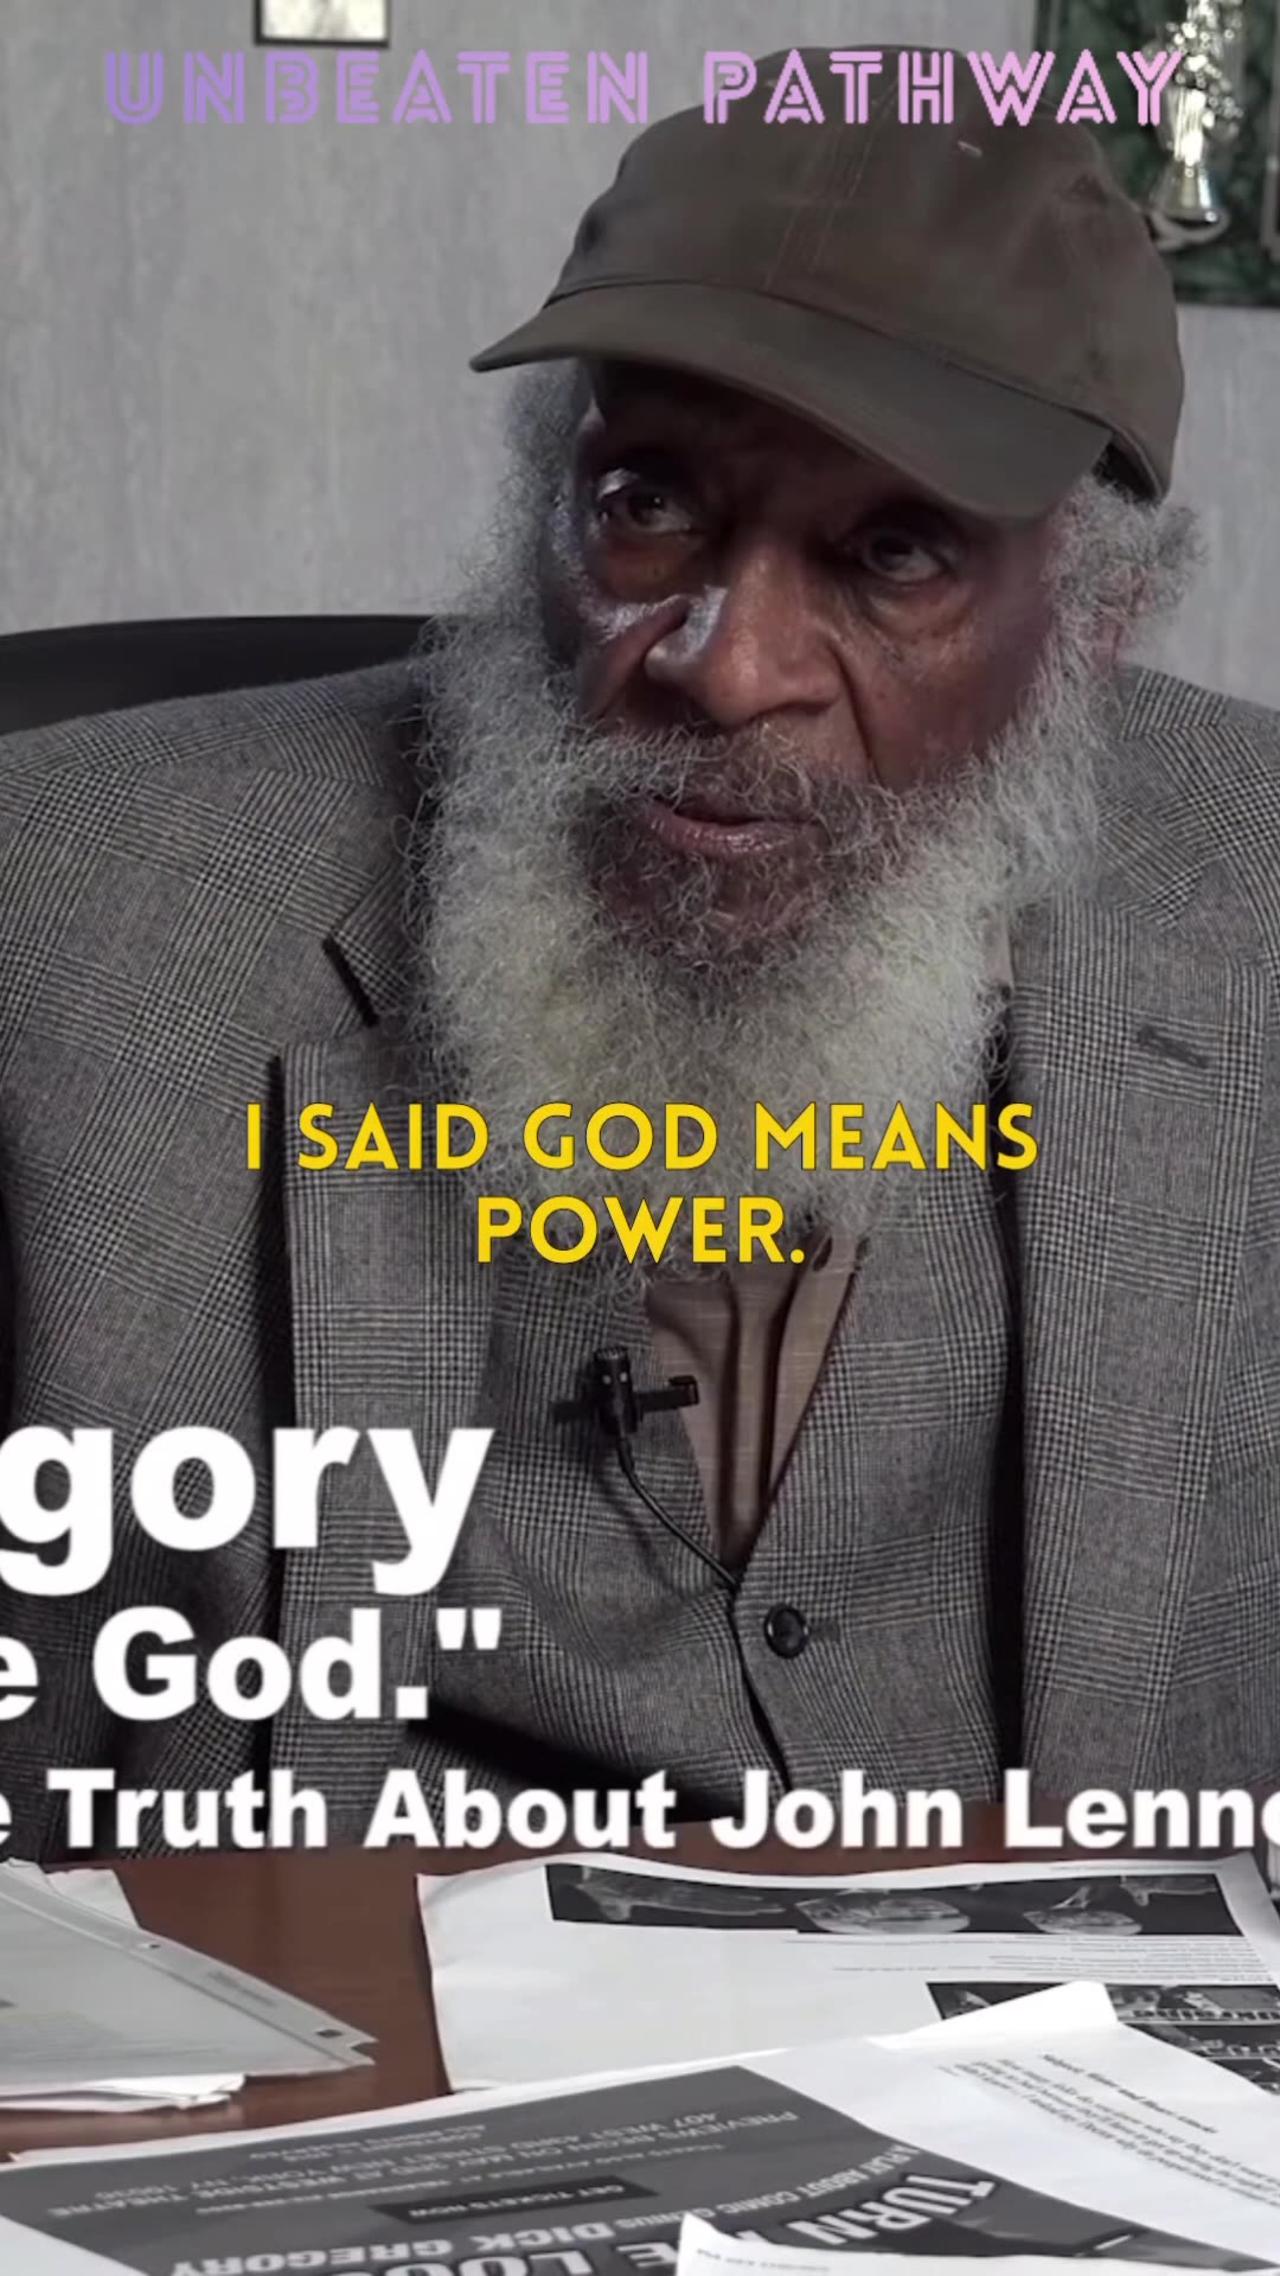 Does fasting bring you closer to God? by Dick Gregory